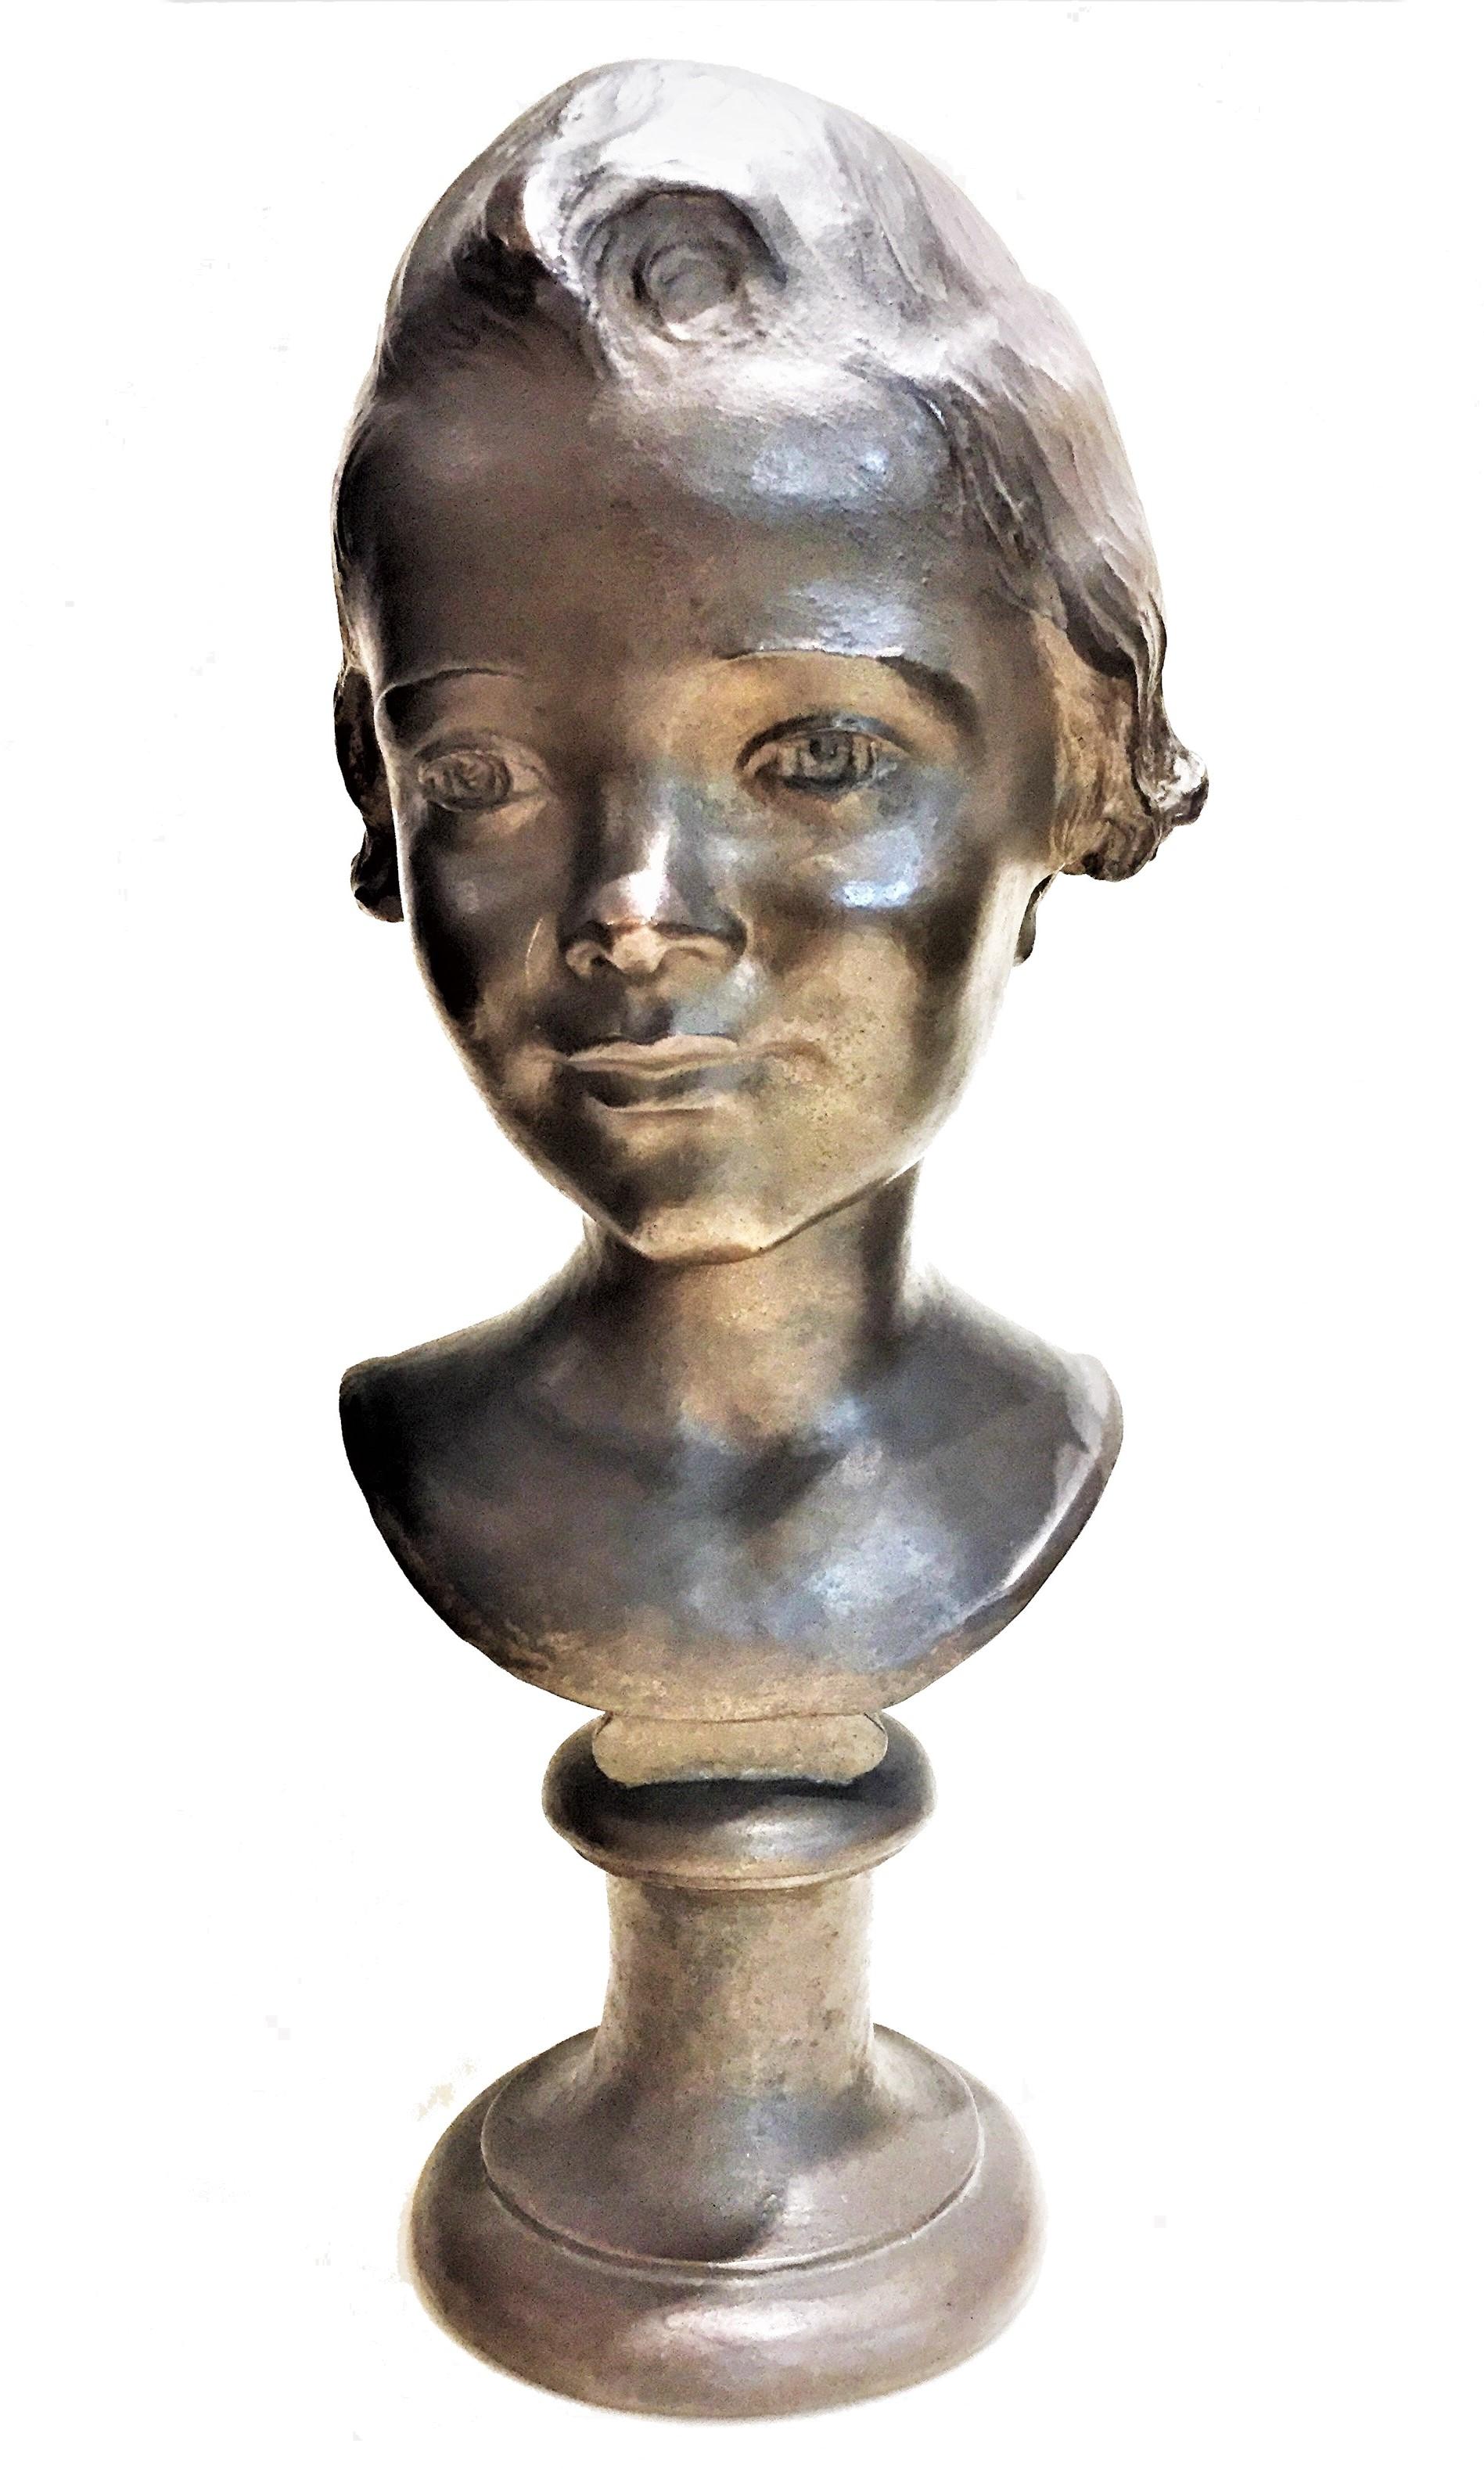 Signed under right shoulder: Mabel Conkling 
Engraved under left shoulder: Natalie

Mabel Conkling (1871-1966) was an American sculptor, who was very prolific during the Art Deco period. Known for her public sculptures, especially fountains with